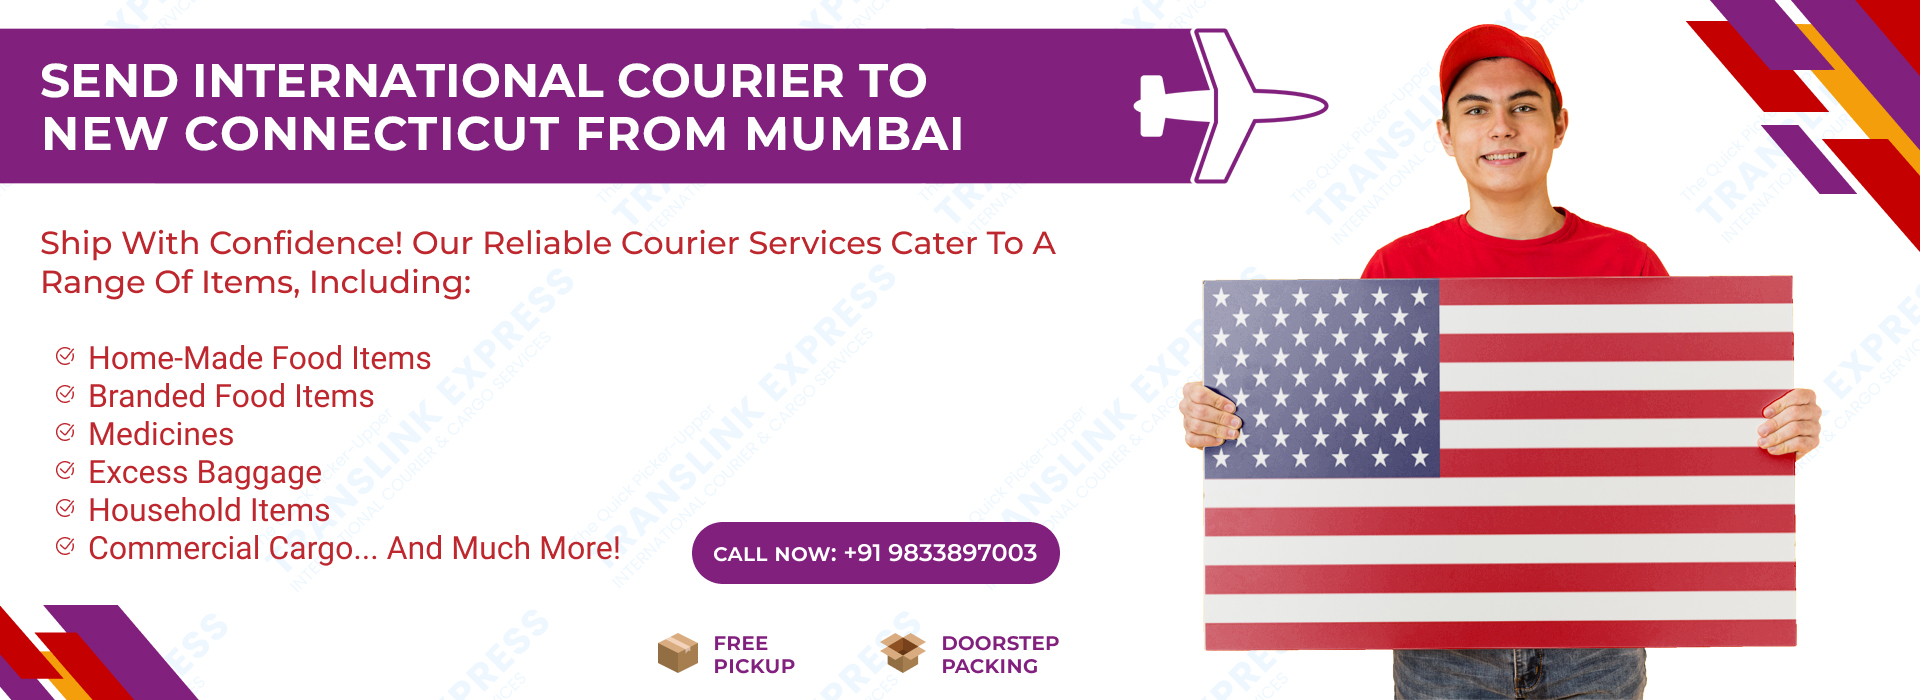 Courier to New Connecticut From Mumbai